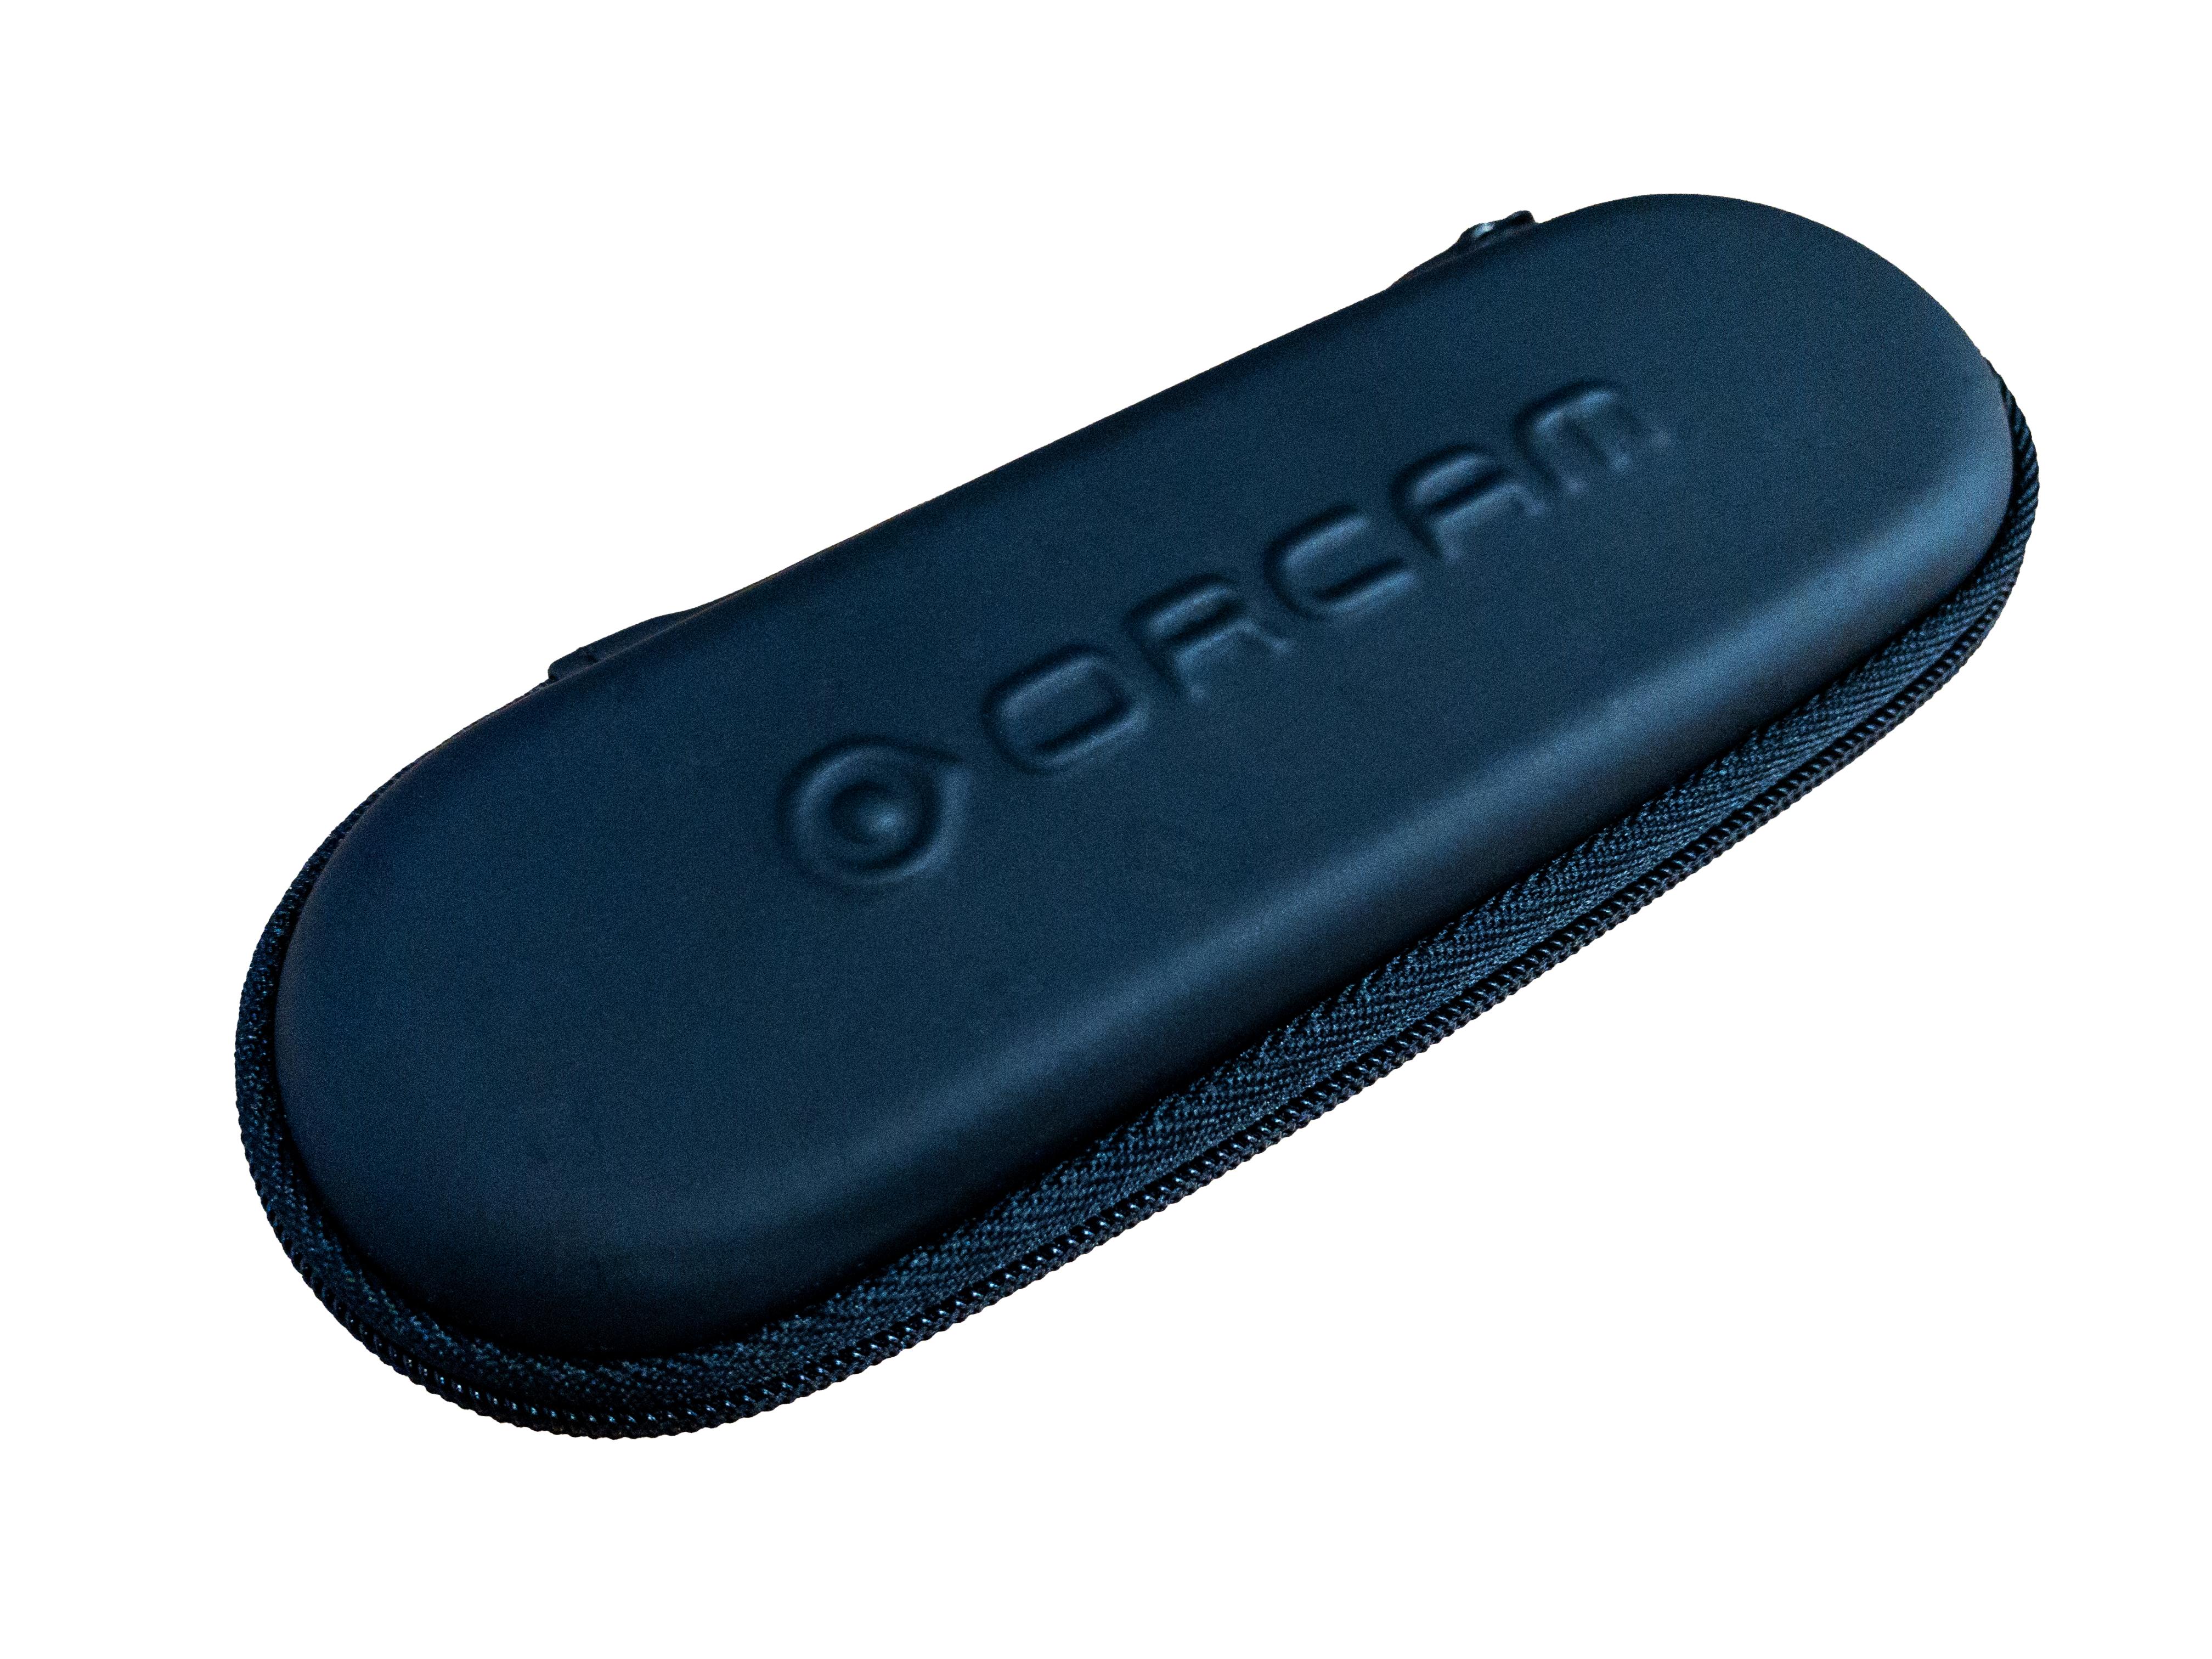 Orcam read smart case closed on the top of the case is the orcam logo embossed onto the case